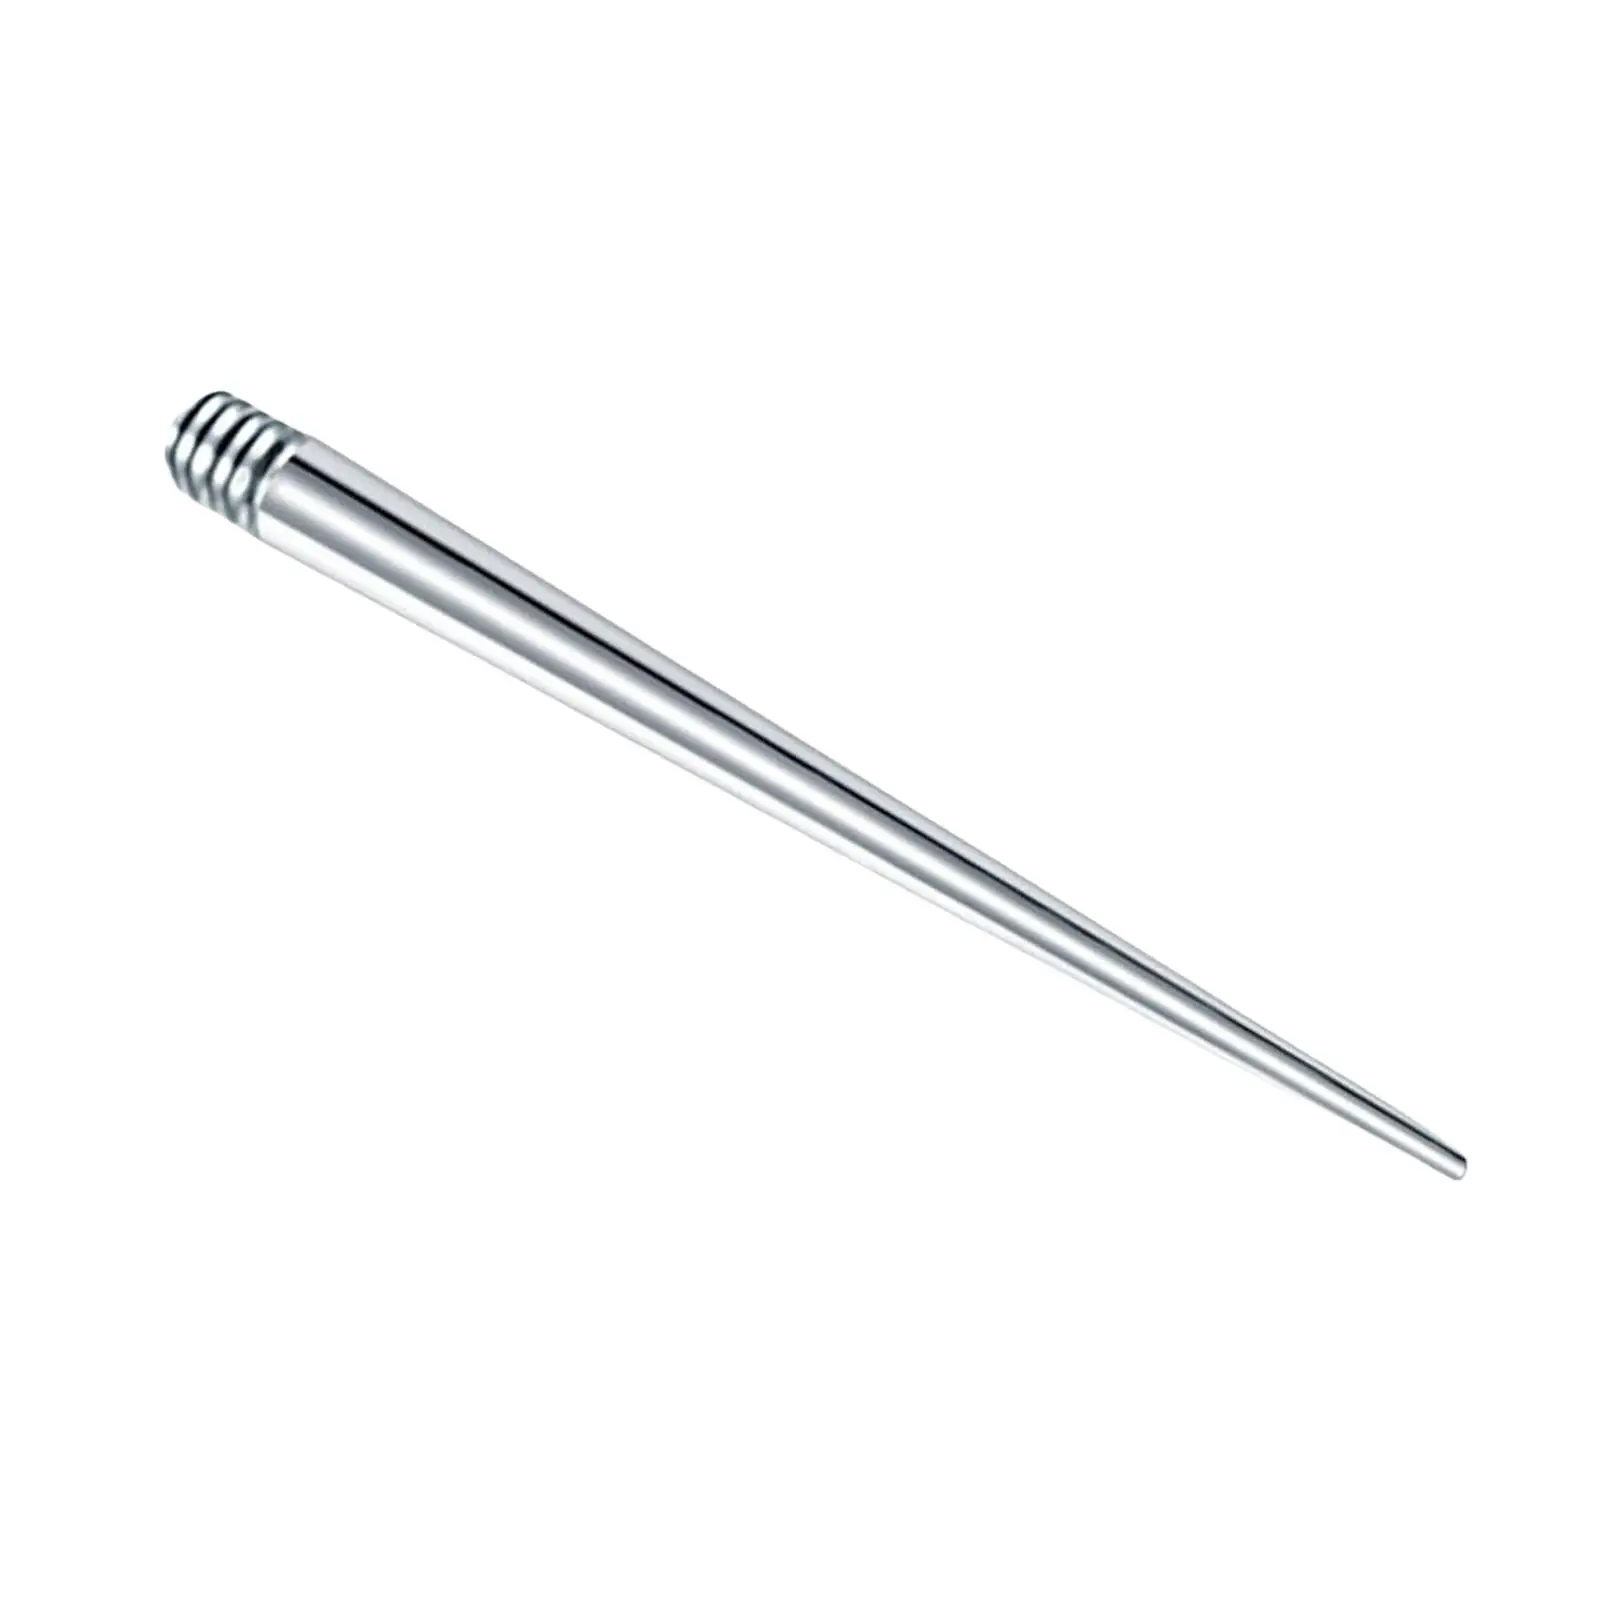 Threaded Taper Piercing Tool Threaded Pin Taper Stainless Steel 1.18inch Length